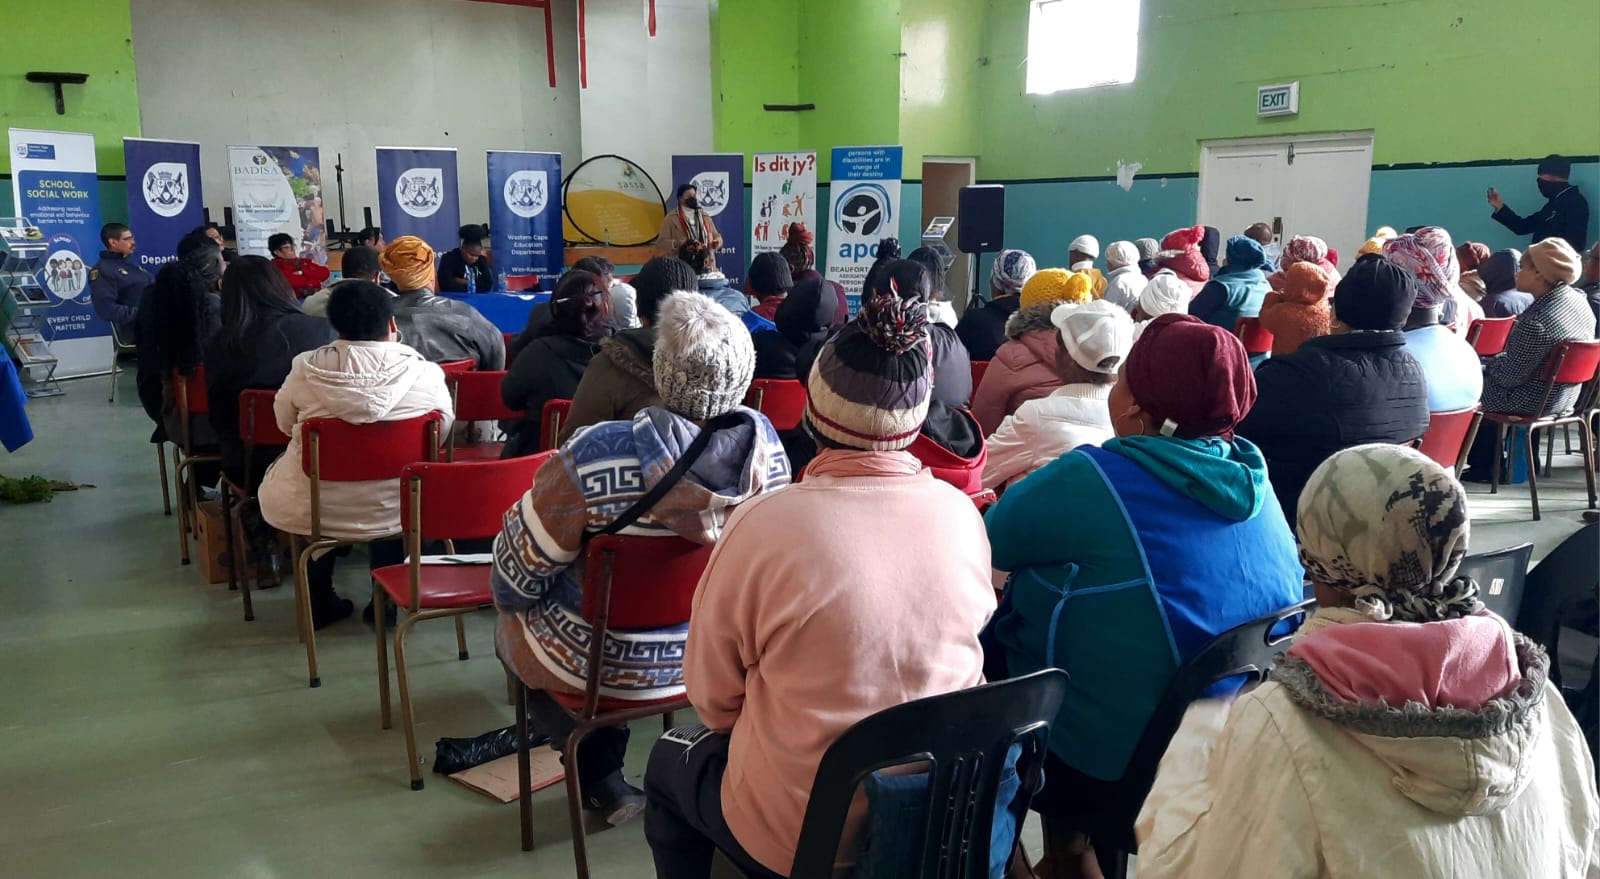 Child Protection Imbizo in Beaufort West